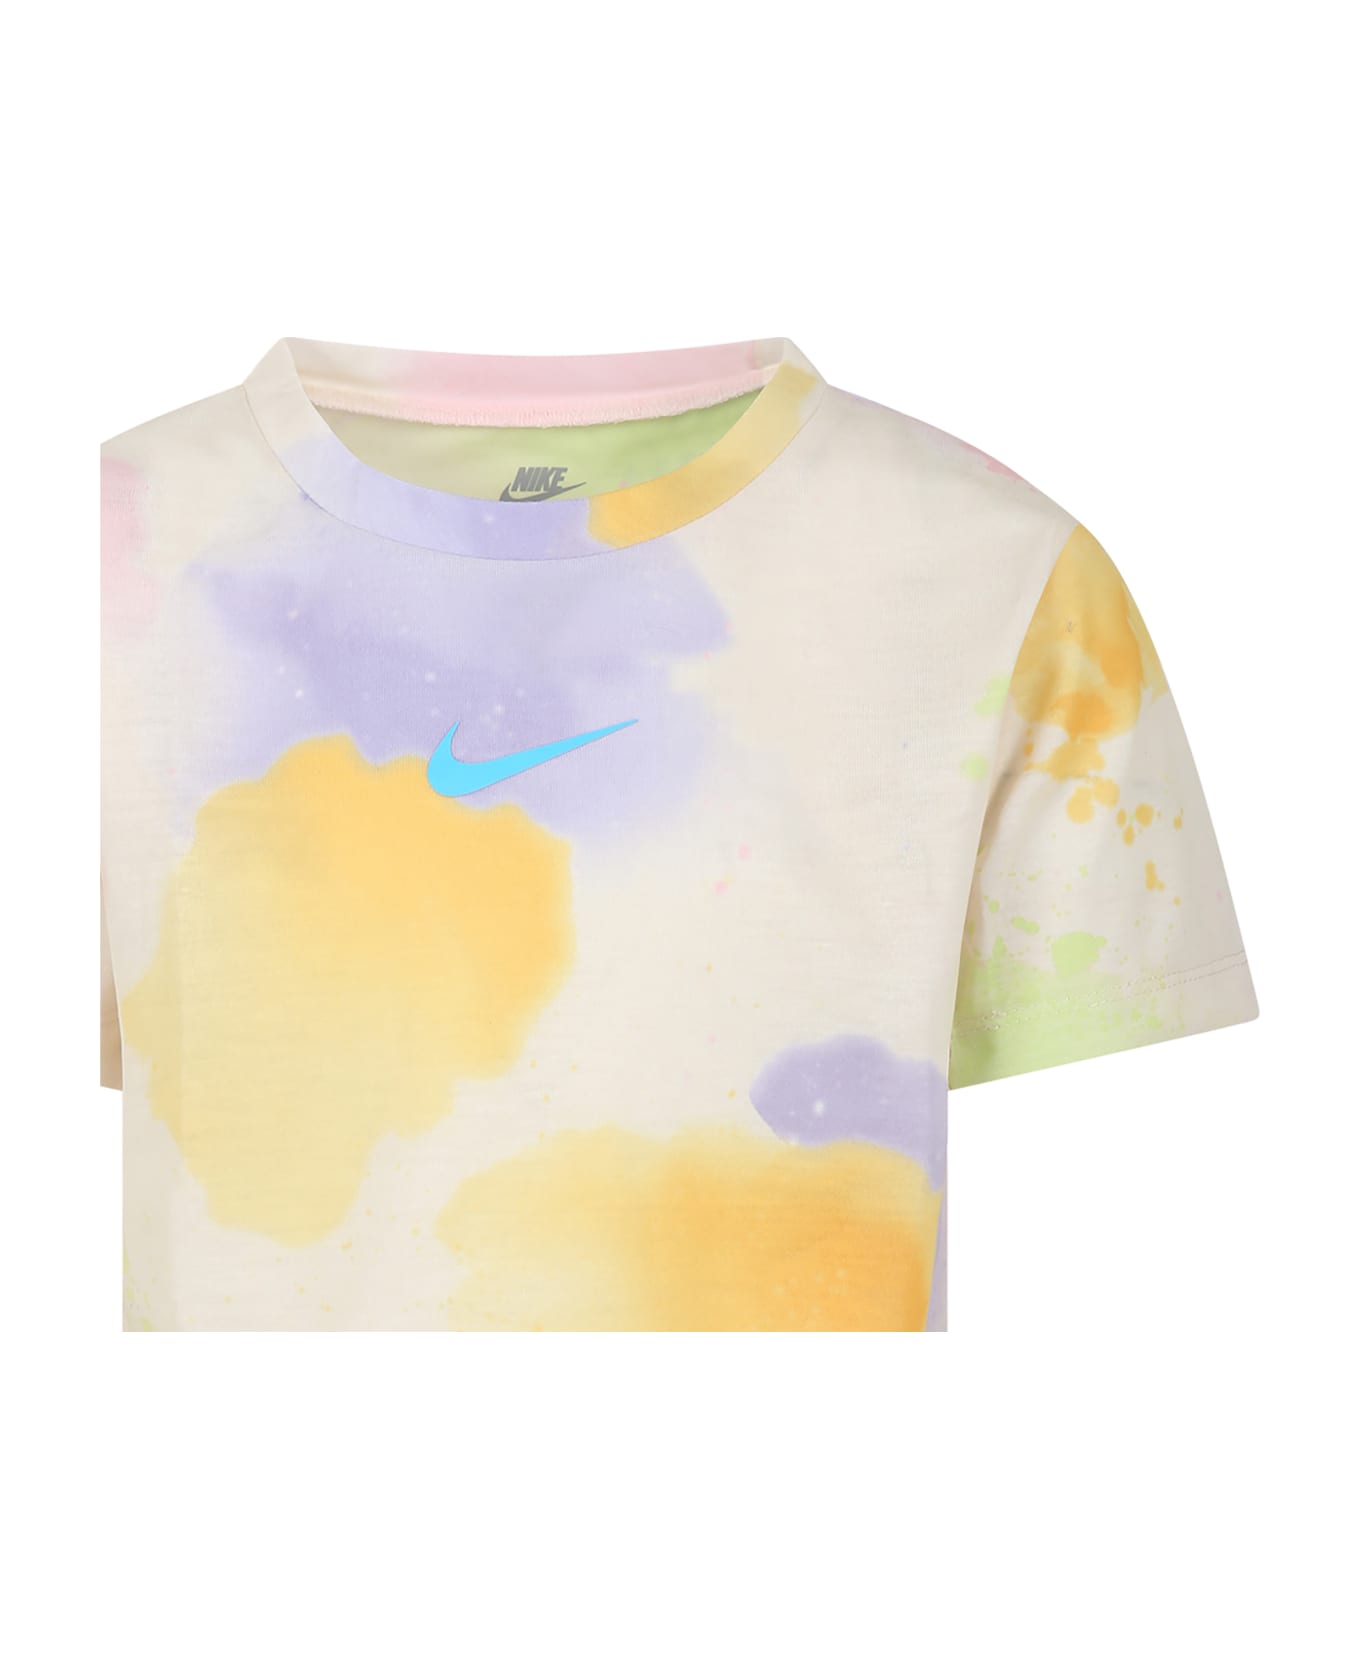 Nike Ivory T-shirt For Girl With Iconic Swoosh - Multicolor